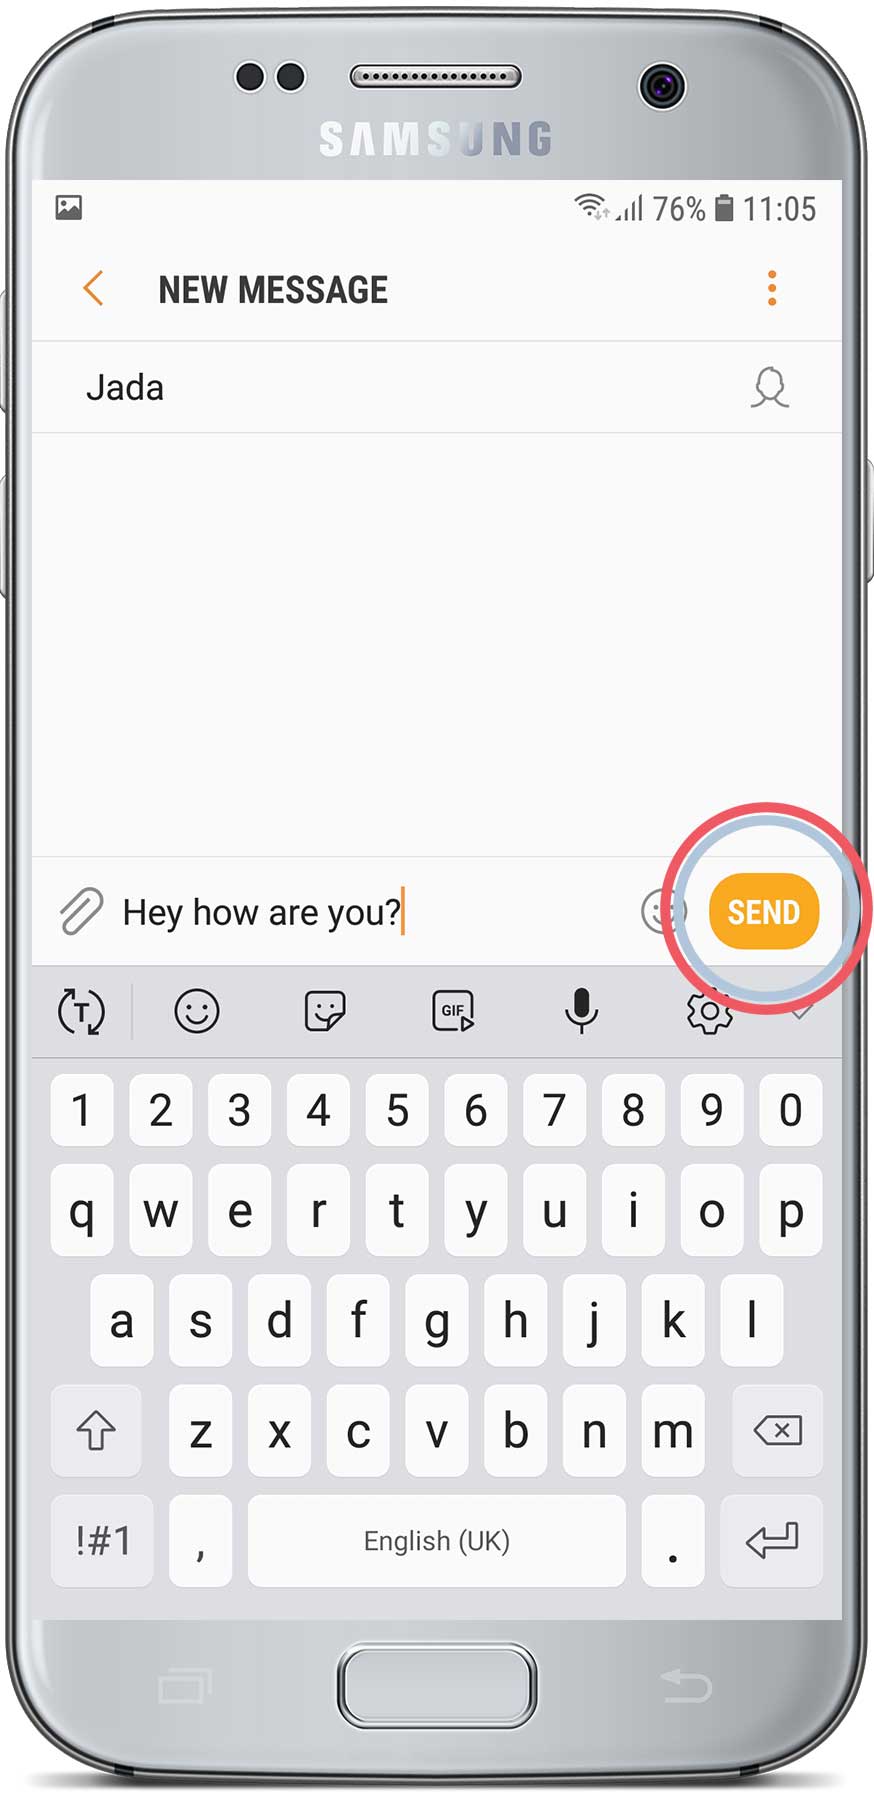 How to send a text message on your Android phone - April